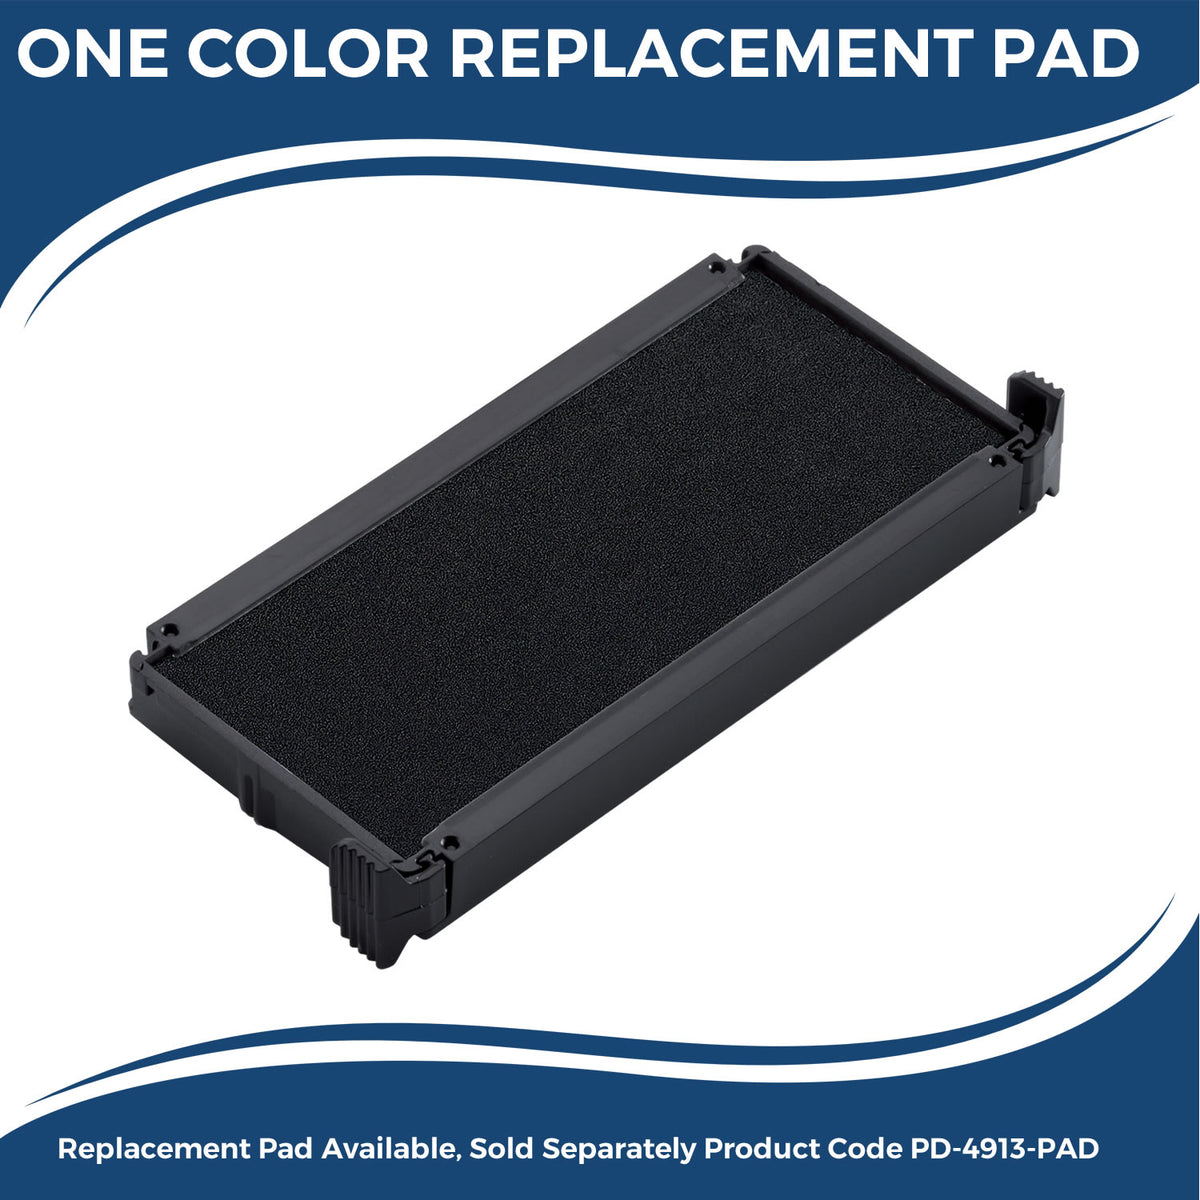 Large Self-Inking Bold Deceased Stamp 4877S Large Replacment Pad